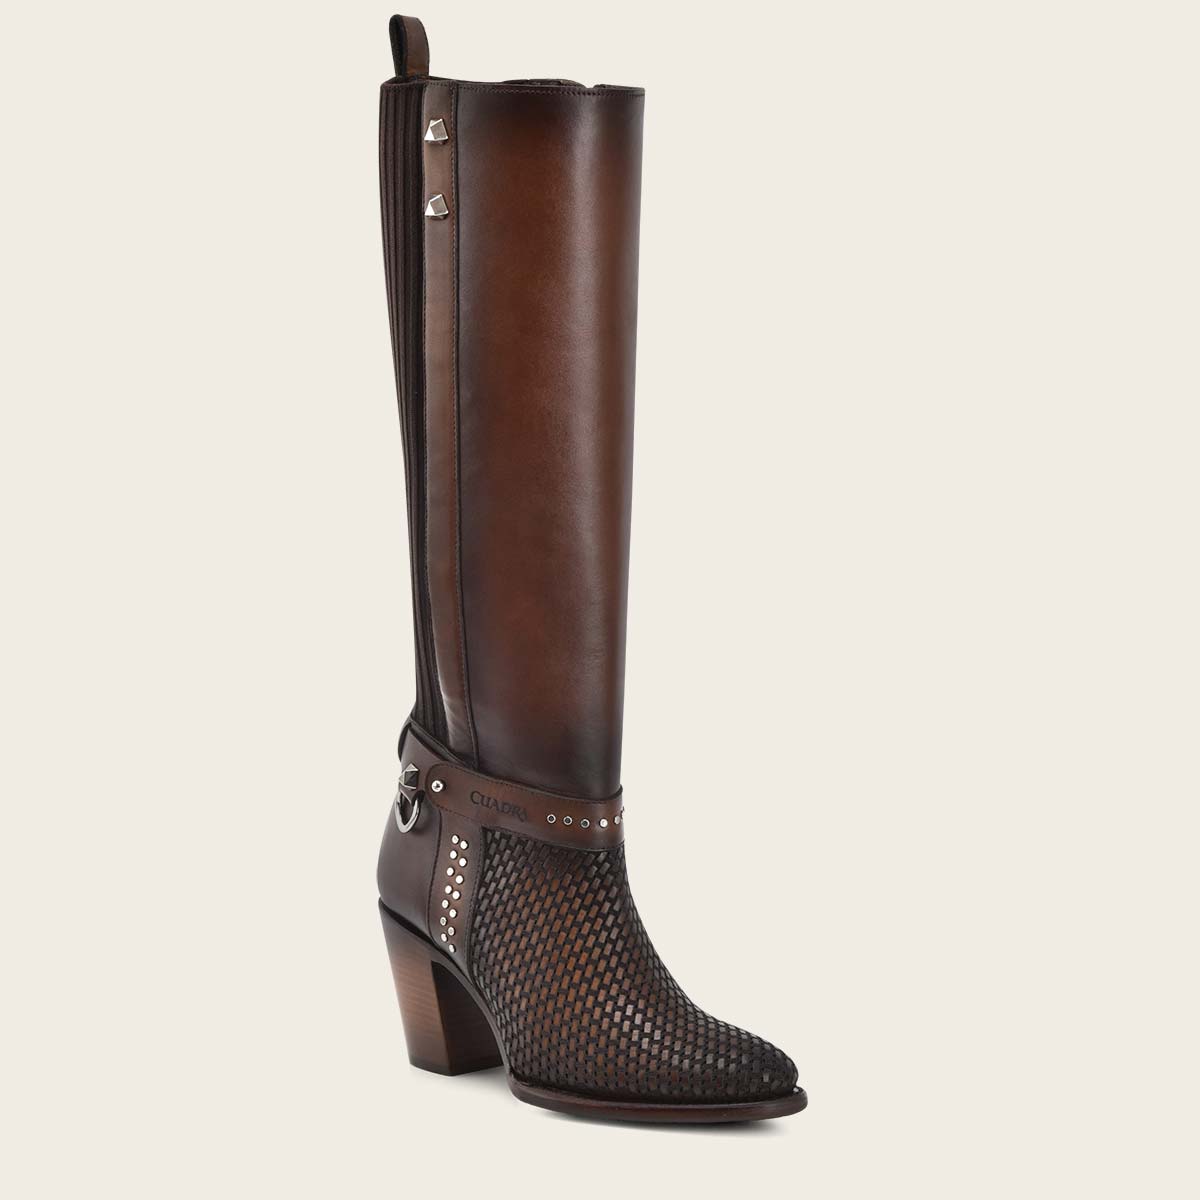 Stylish brown honey leather tall boot